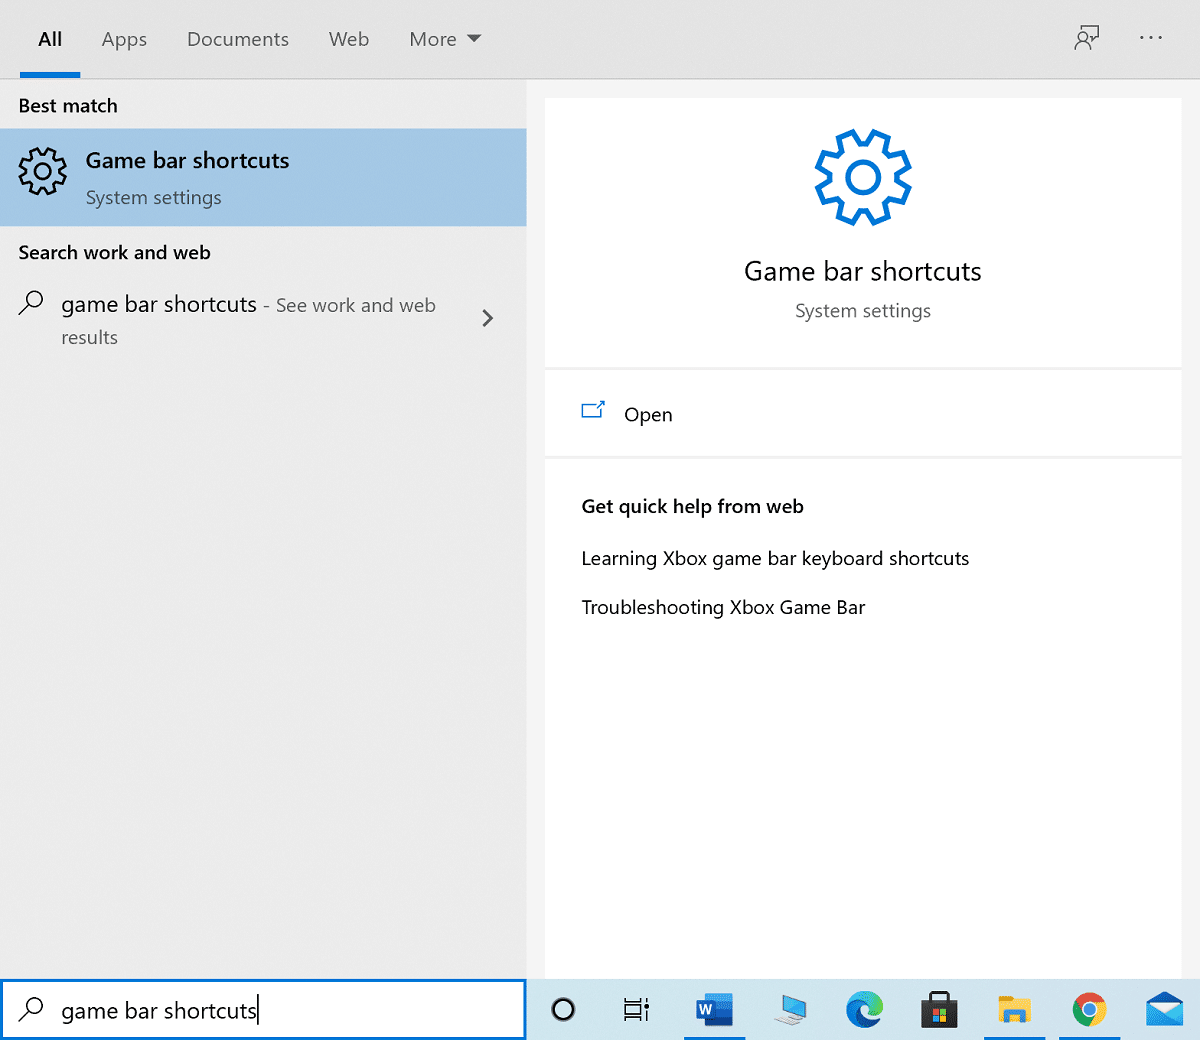 Type Game bar shortcuts in the Windows search box and launch it